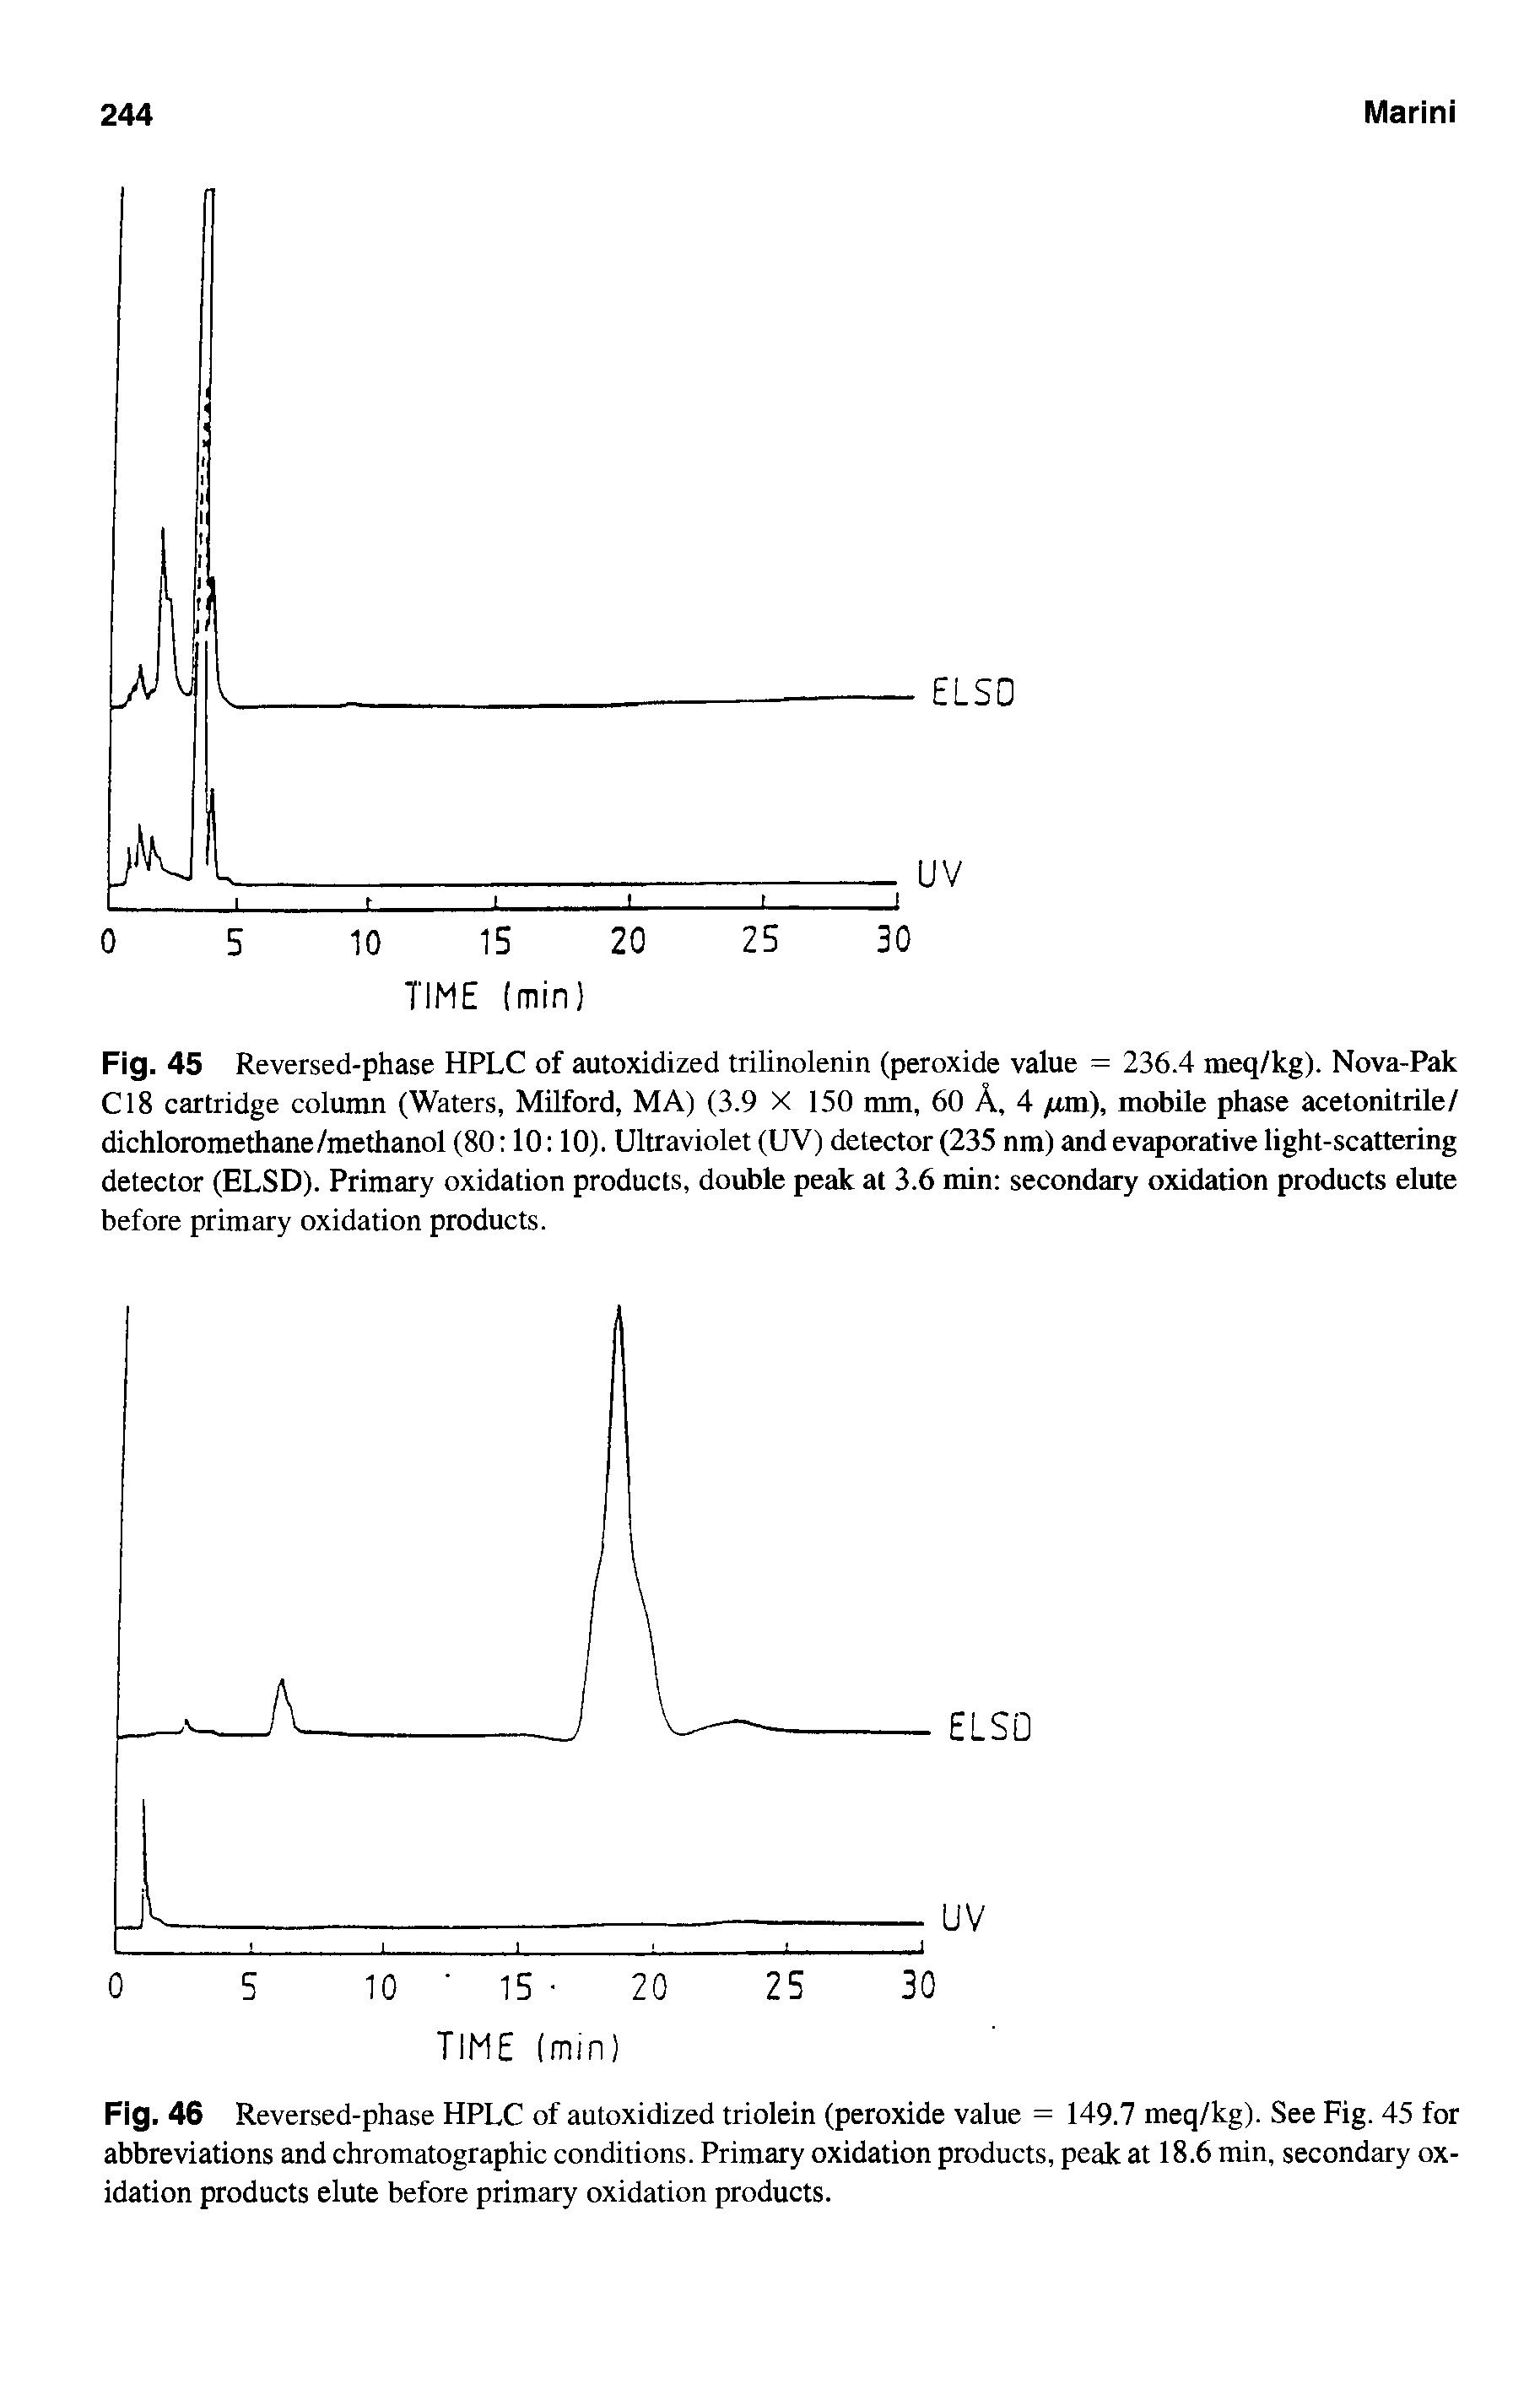 Fig. 46 Reversed-phase HPLC of autoxidized triolein (peroxide value = 149.7 meq/kg). See Fig. 45 for abbreviations and chromatographic conditions. Primary oxidation products, peak at 18.6 min, secondary oxidation products elute before primary oxidation products.